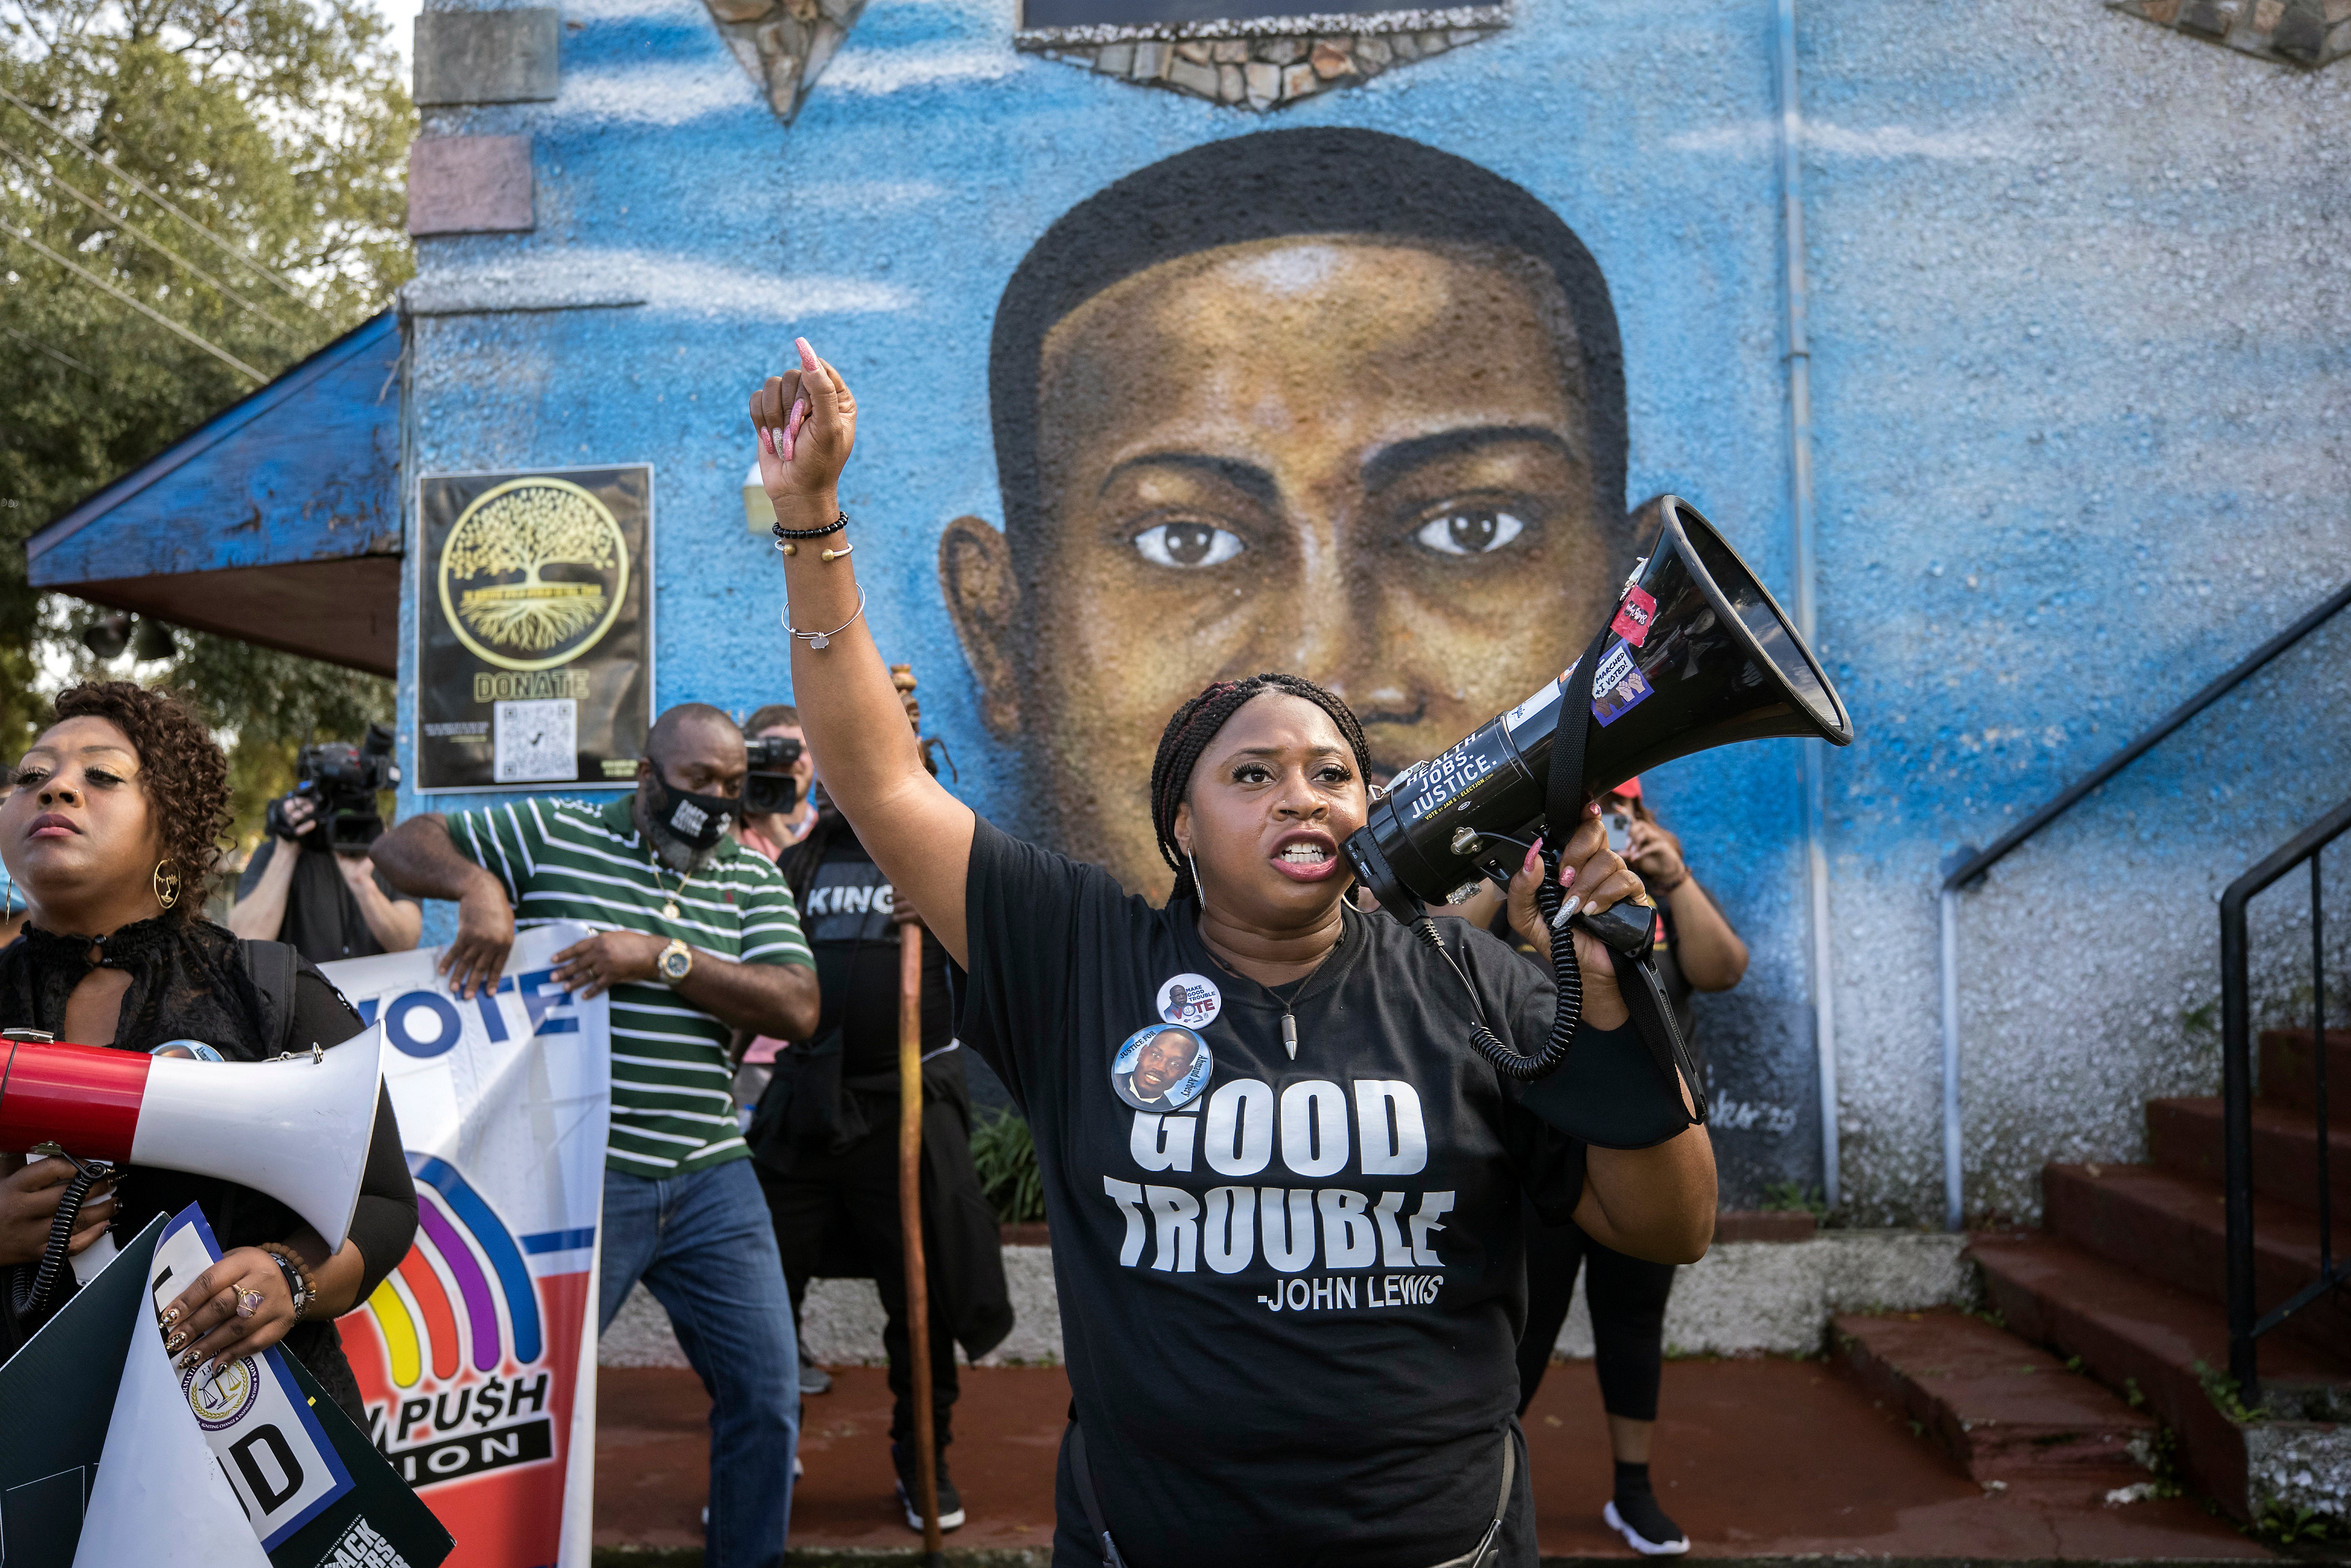 Supporters of Ahmaud Arbery’s family gather in front of a mural of him during a march in Brunswick, Georgia, on day 10 of the trial